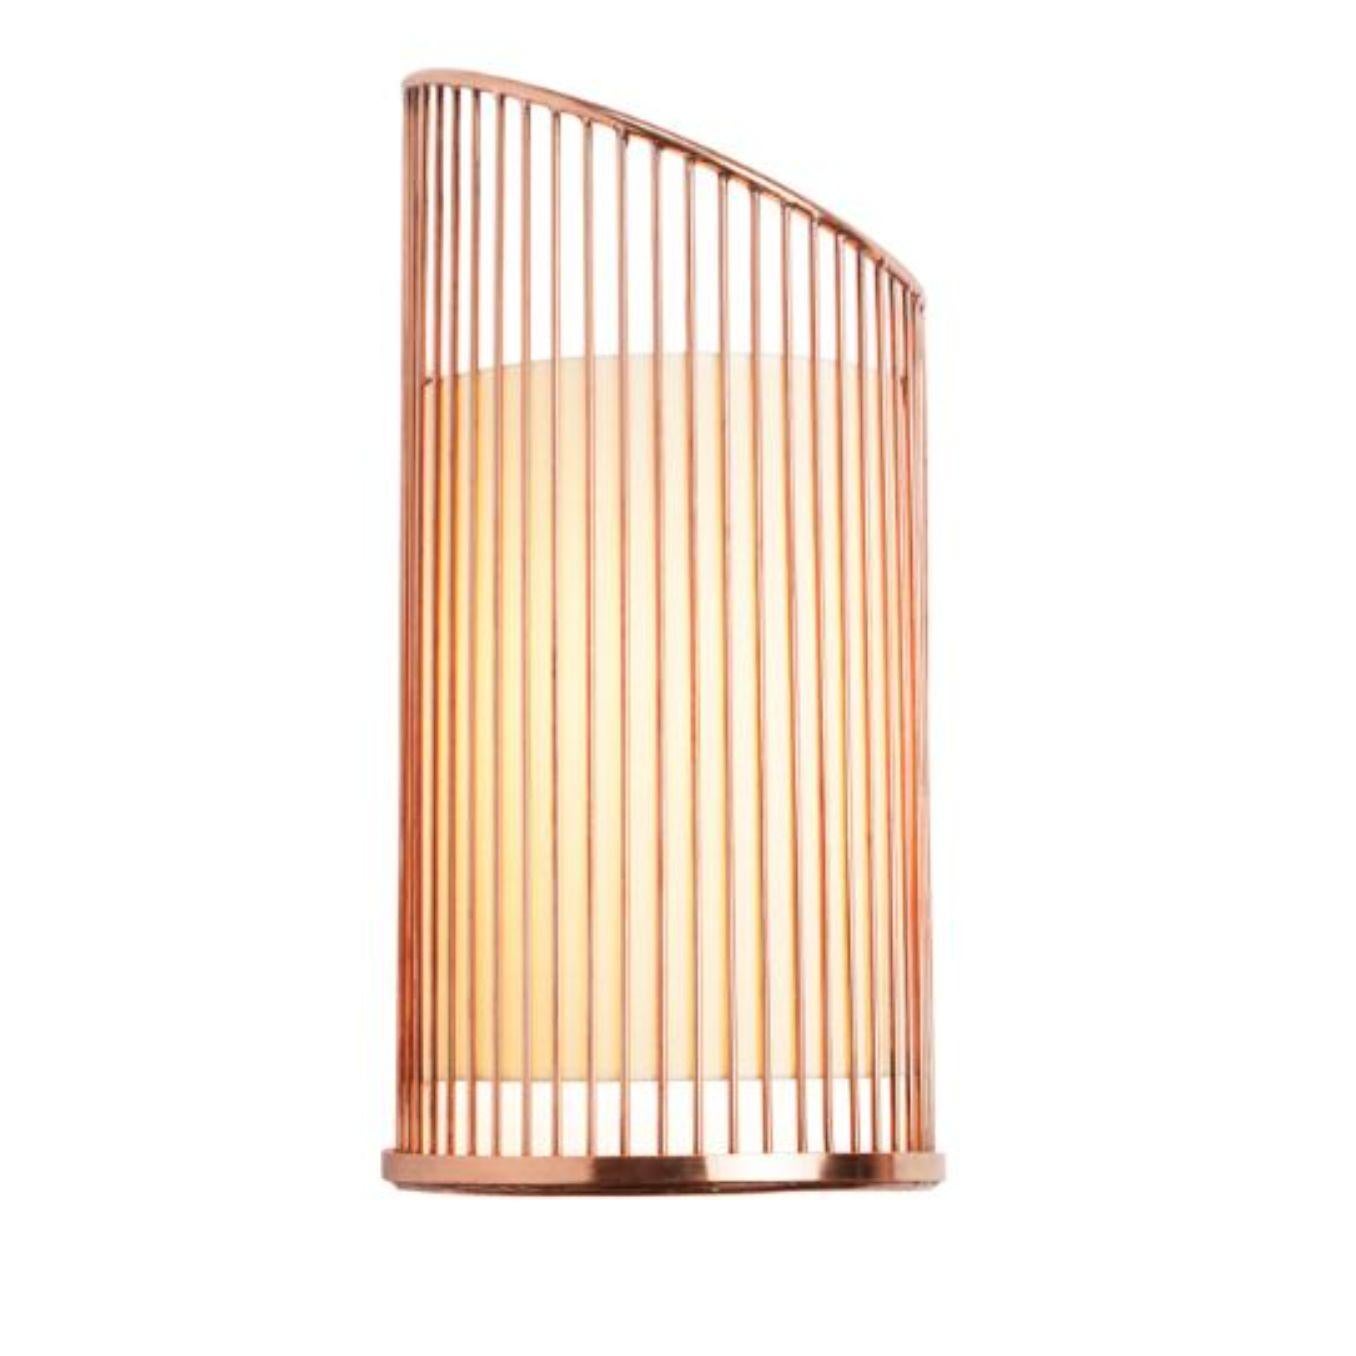 Copper new spider wall lamp with copper ring by Dooq.
Dimensions: W 25x D 15x H 50cm.
Materials: lacquered metal, polished or brushed metal, copper.
abat-jour: cotton
Also available in different colors and materials.